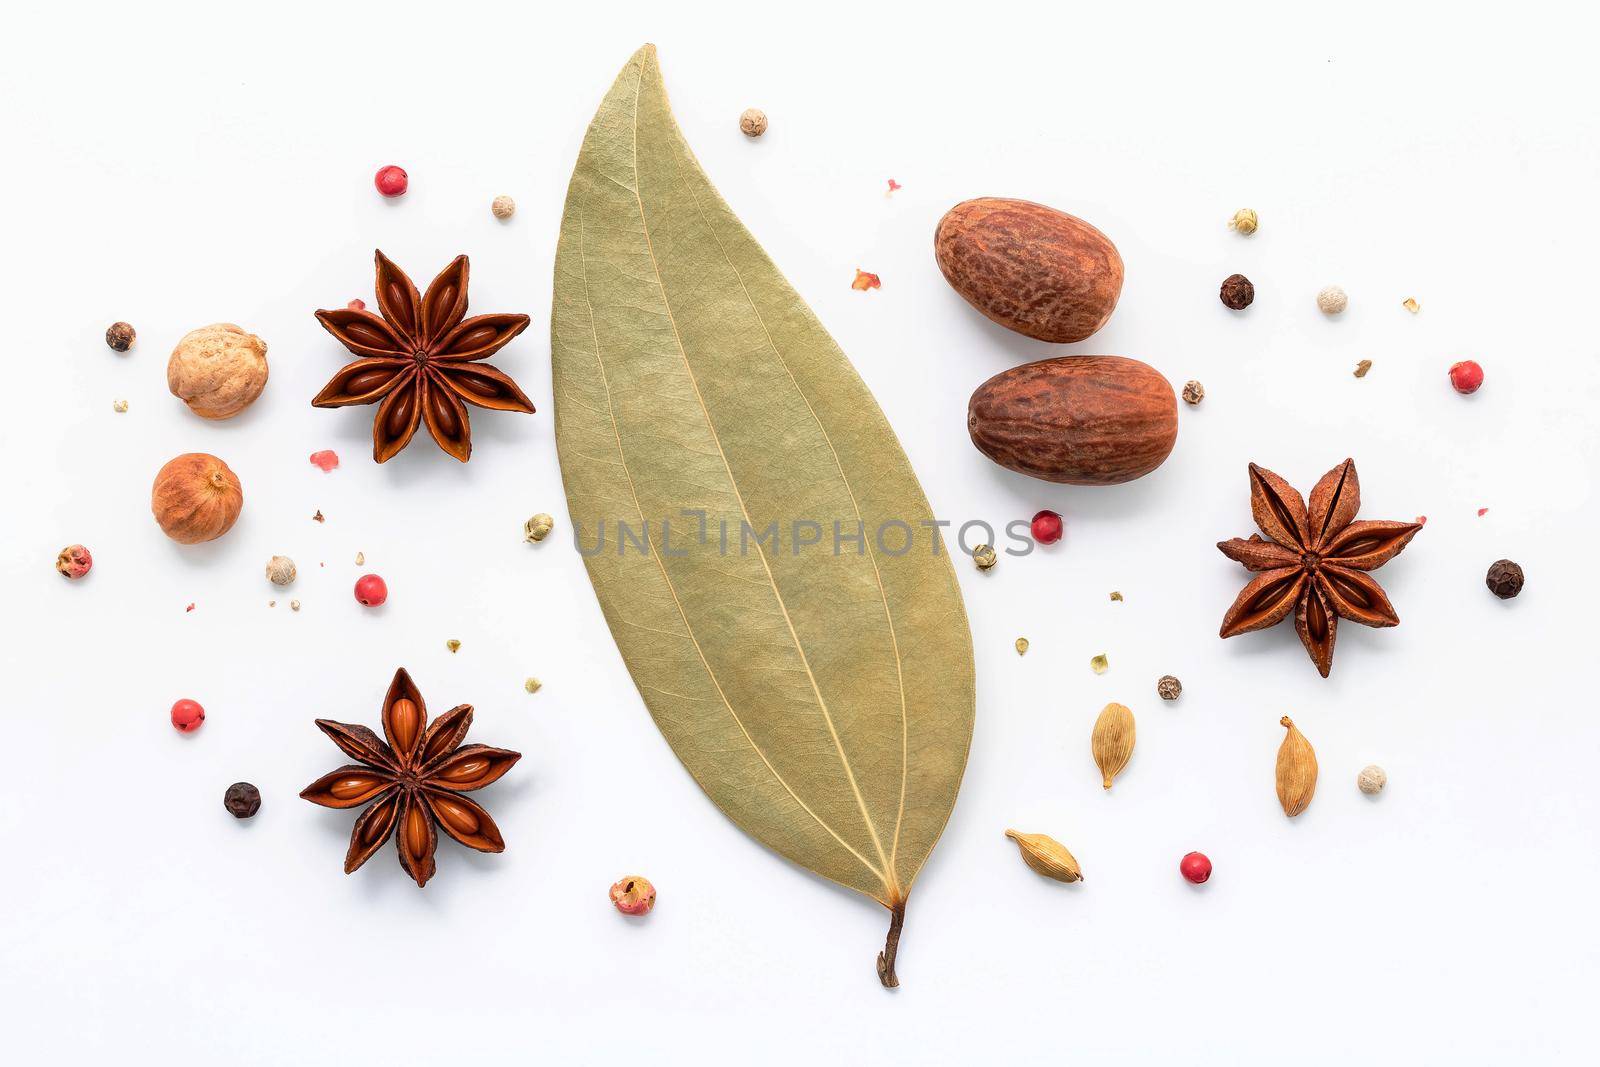 Cinnamon sticks, star anise and spices isolated on white background. by kerdkanno